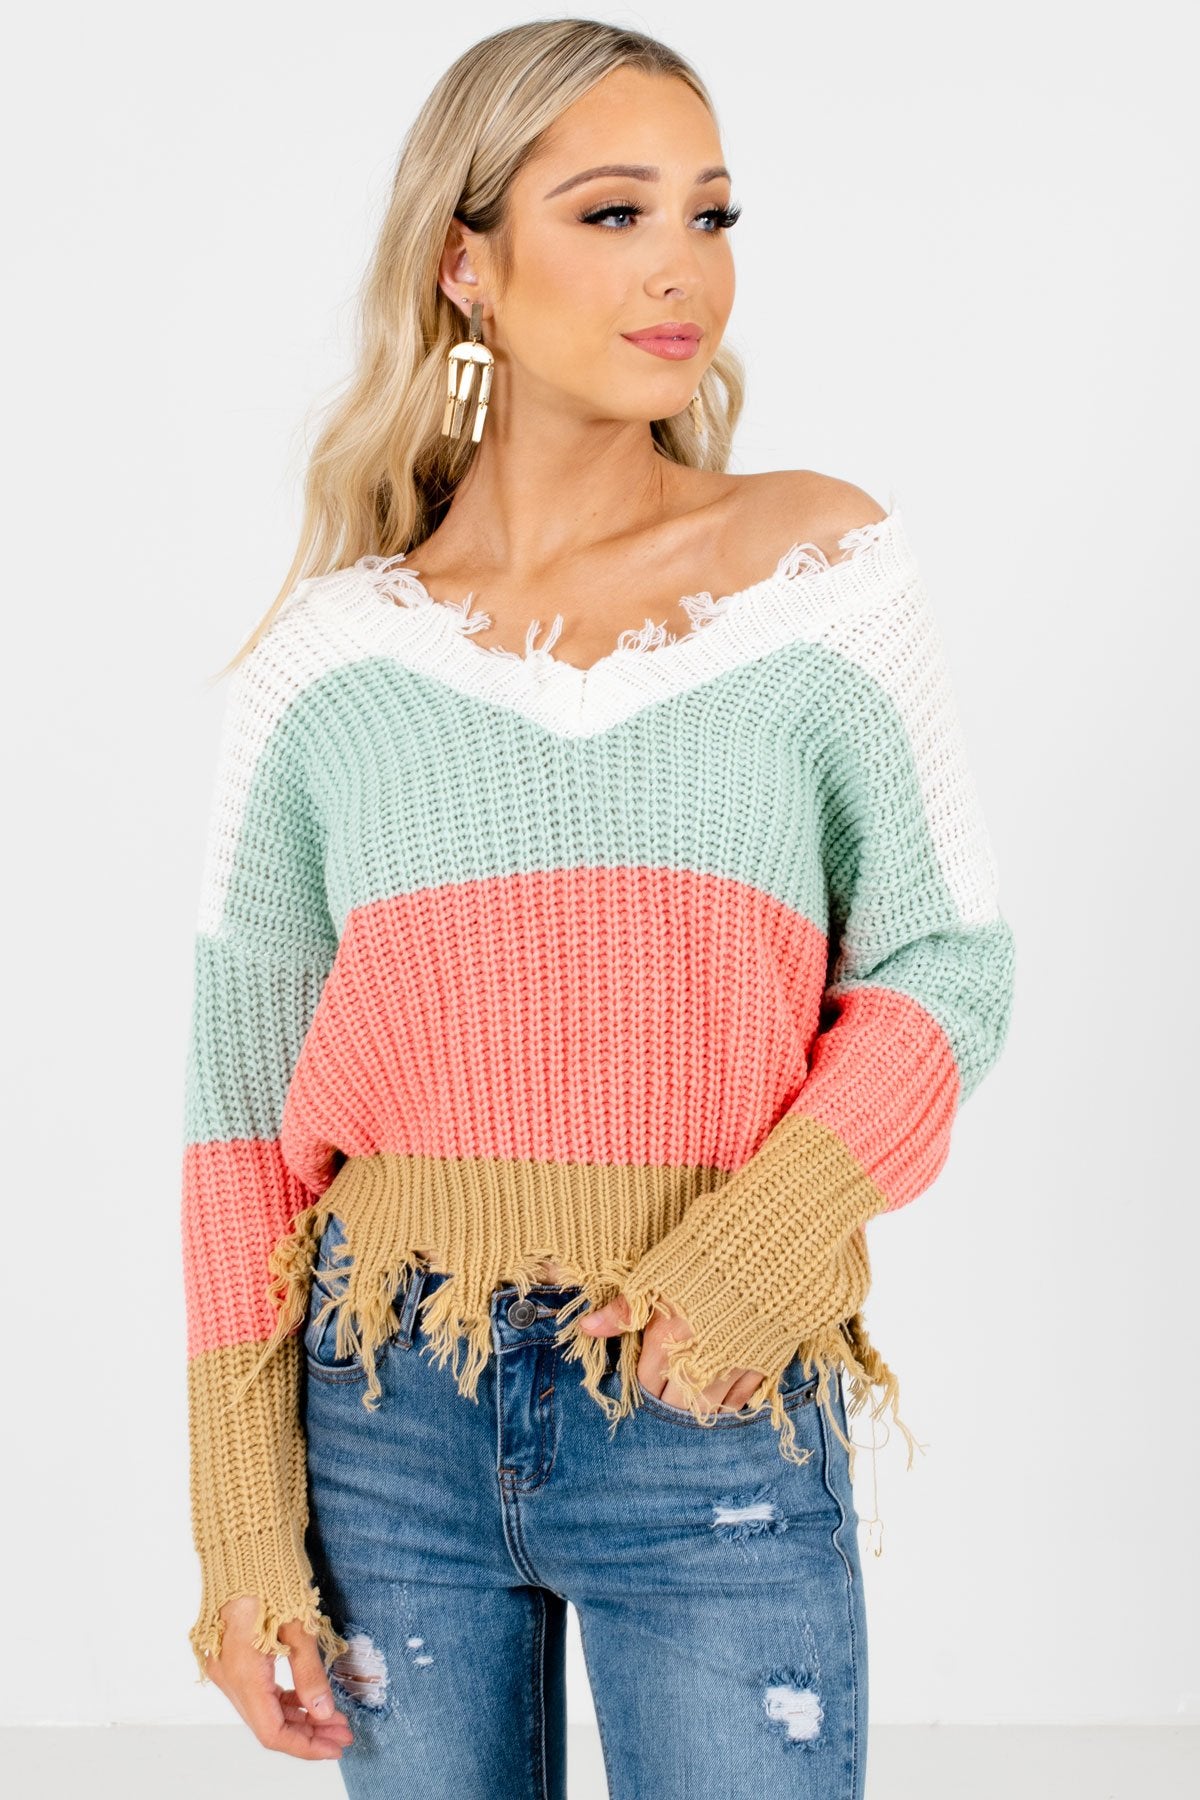 Mint Green Cute and Comfortable Boutique Sweaters for Women